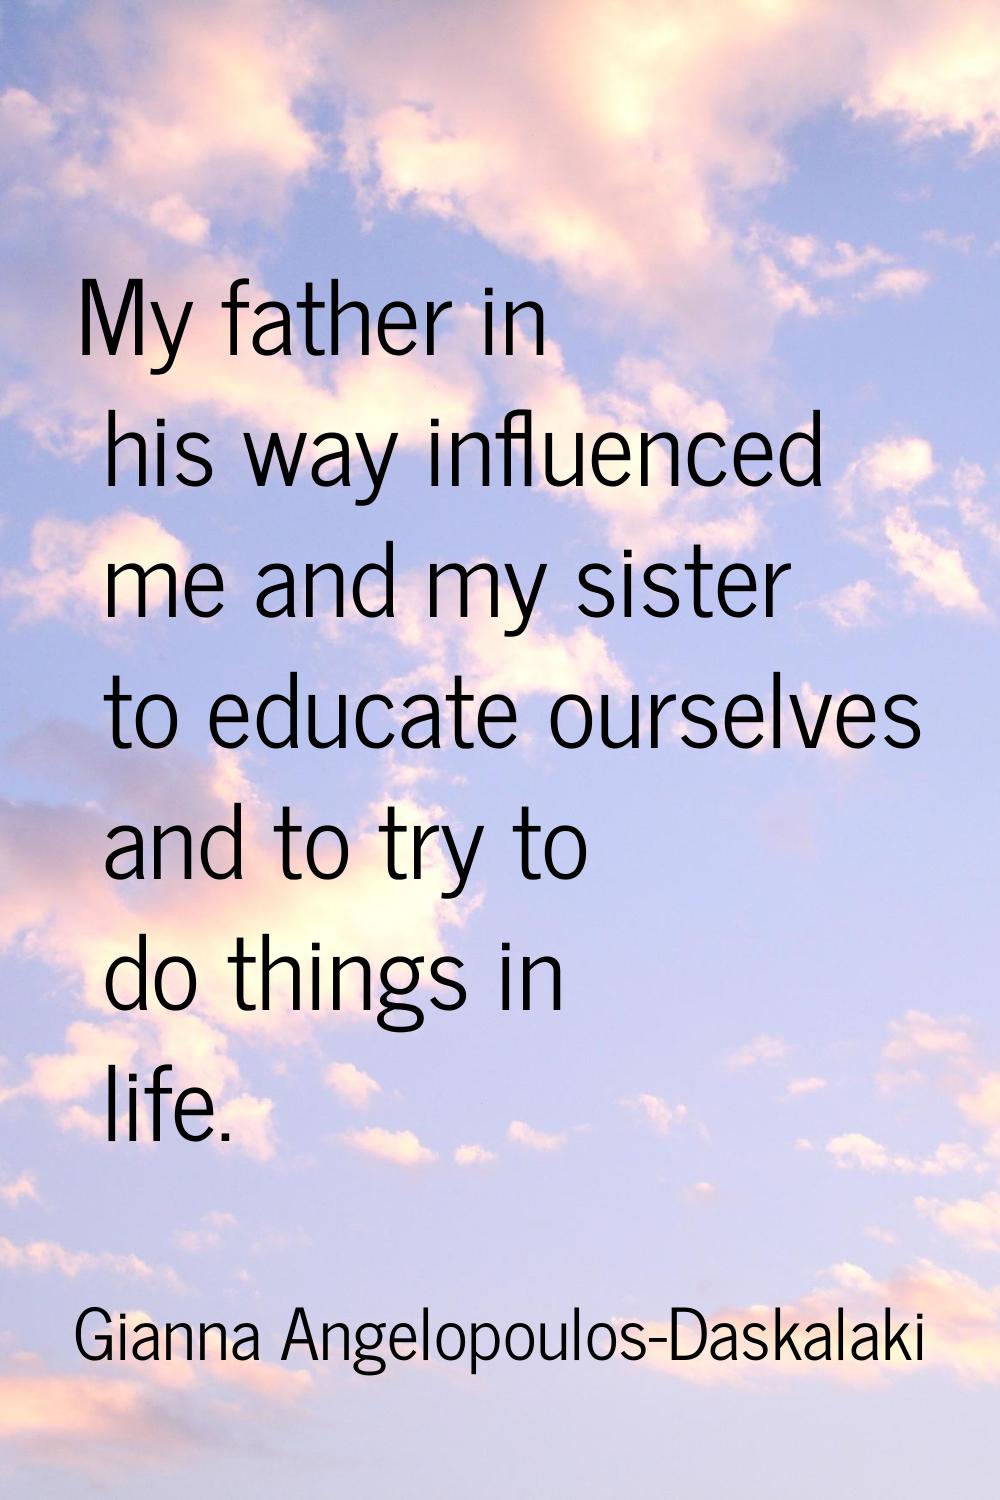 My father in his way influenced me and my sister to educate ourselves and to try to do things in li